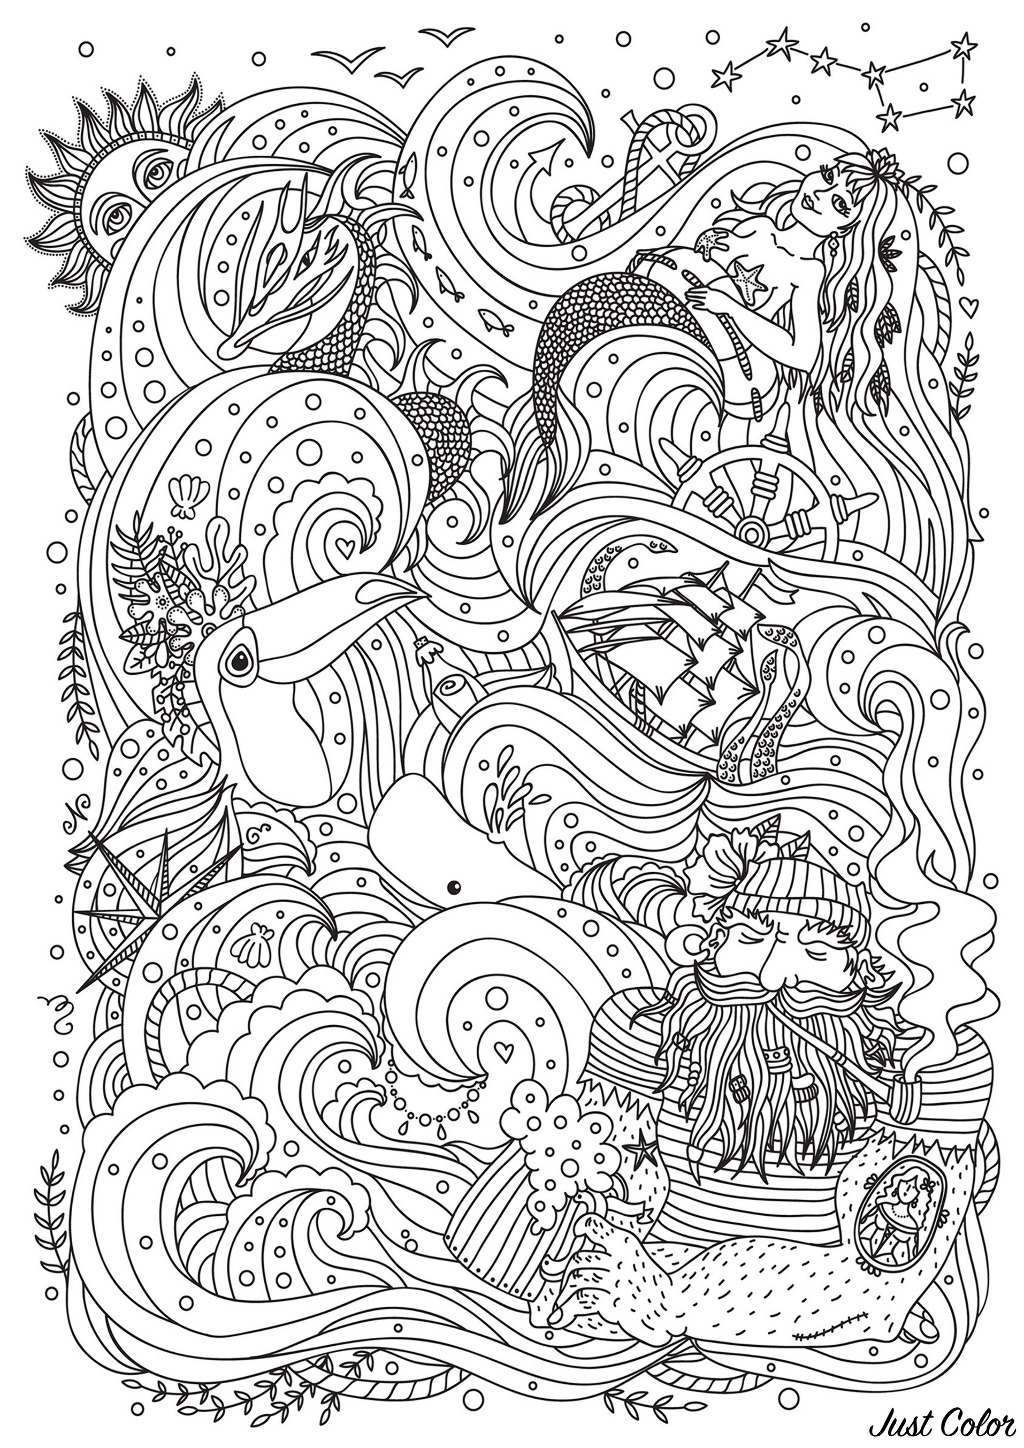 Mermaid sailor bird and boat - Mermaids Adult Coloring Pages